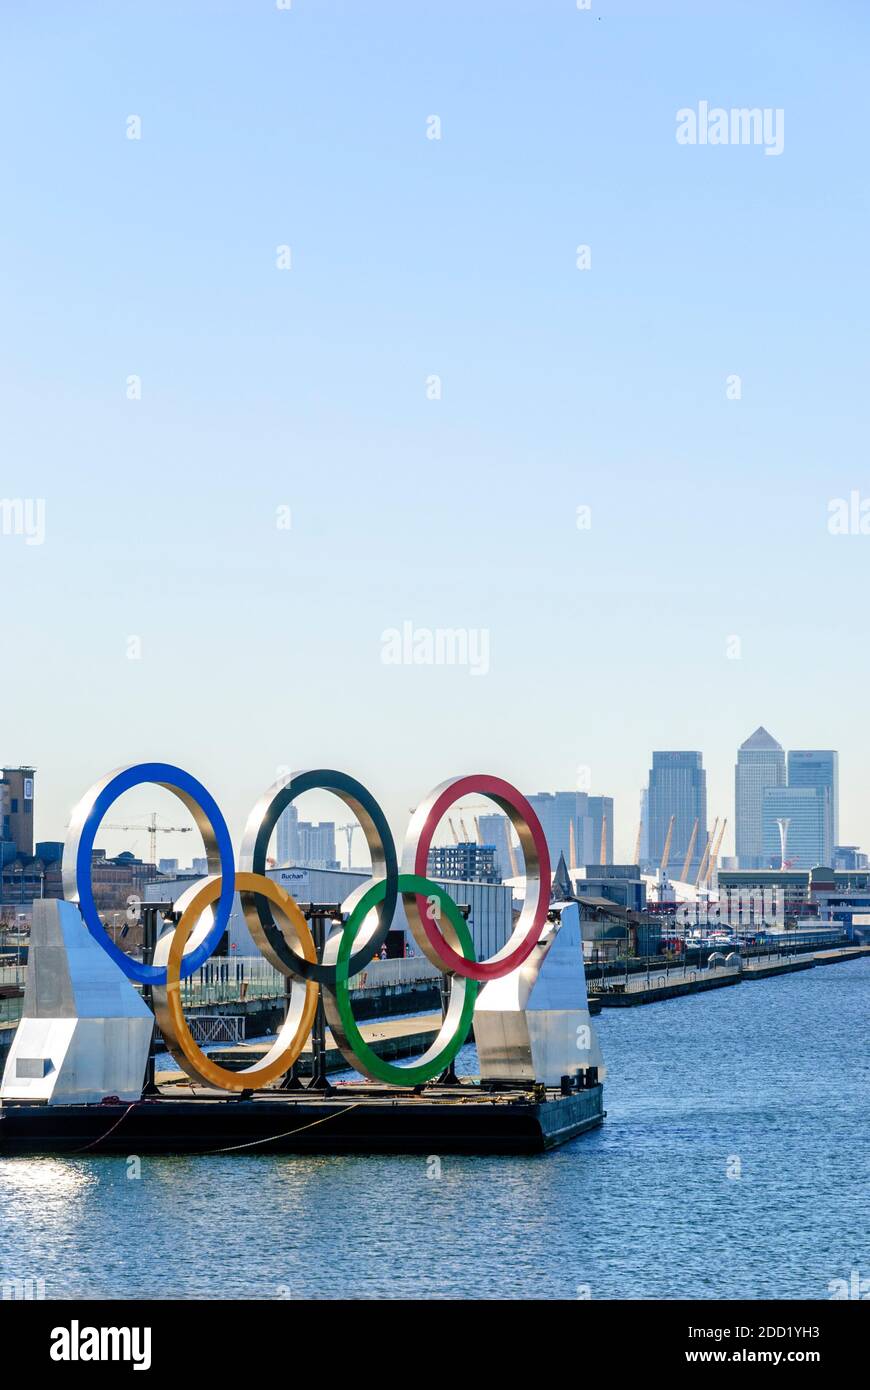 UK, London. Olympic Logo, King George V Dock. High rise Canary Wharf, Millenium Stadium (O2 Centre), London City Airport & Excel Centre (right). 2012. Stock Photo